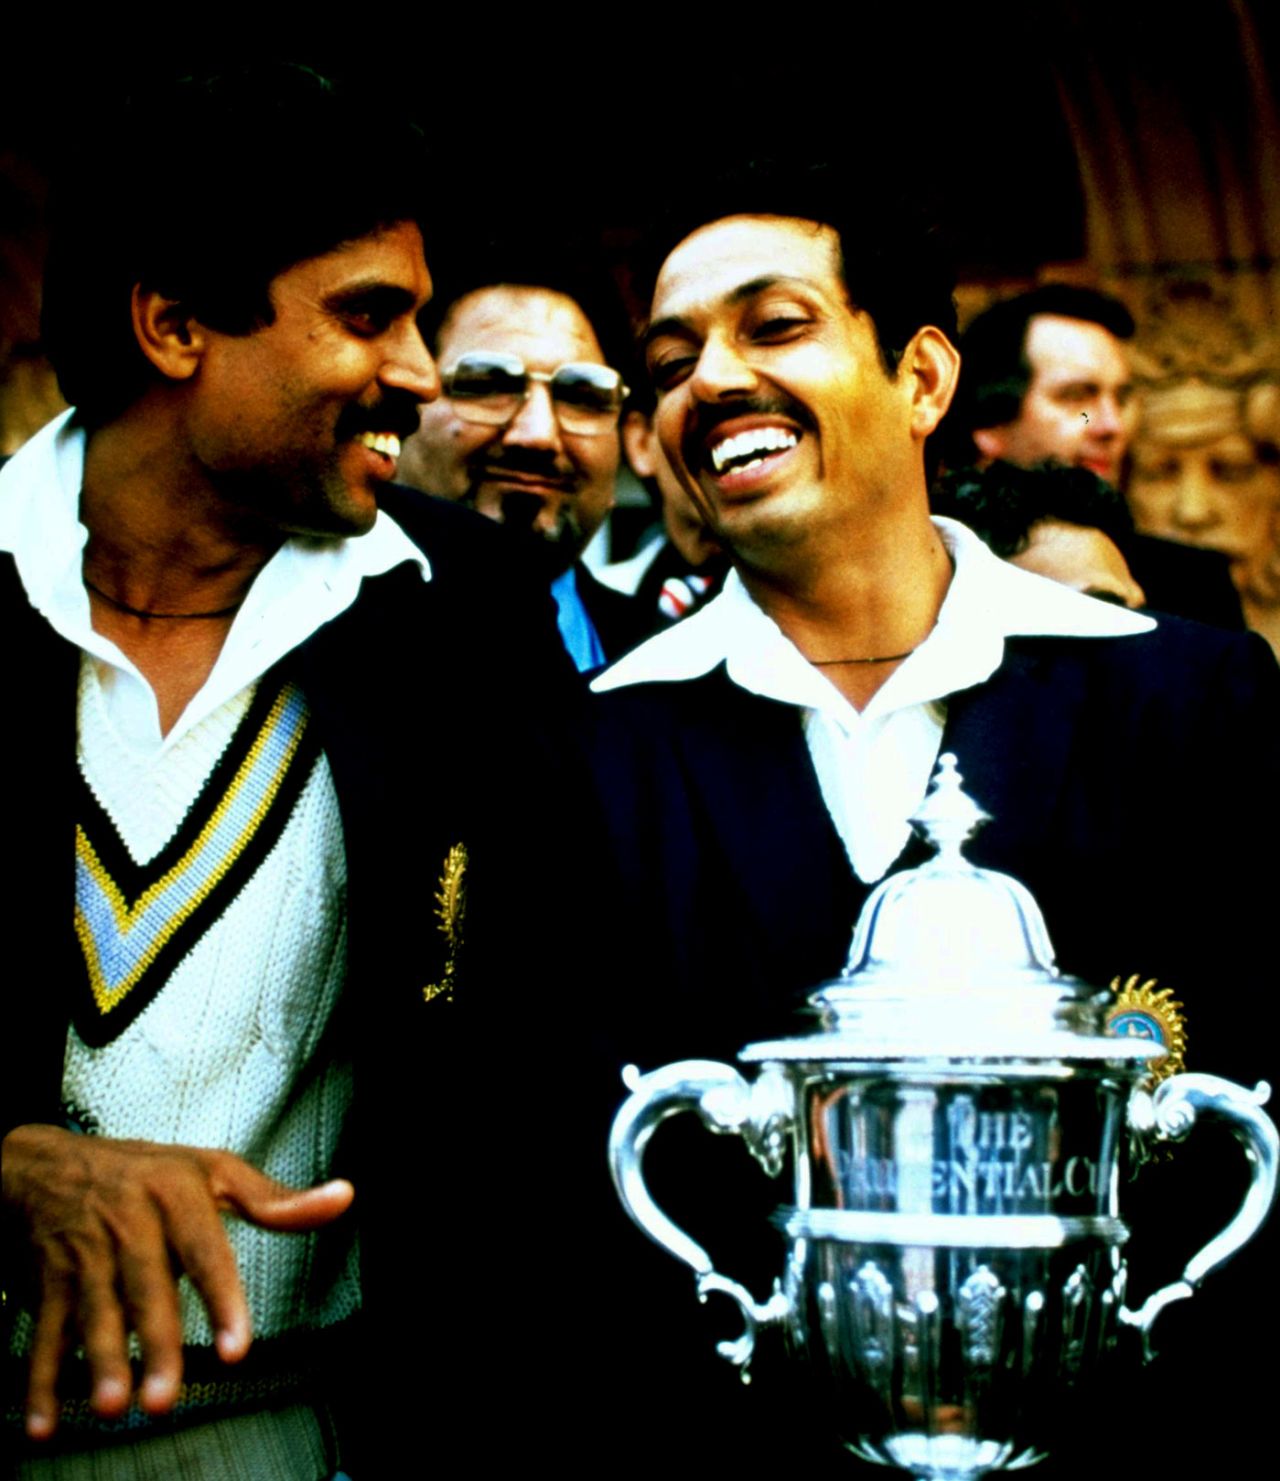 Kapil Dev and Mohinder Amarnath are all smiles after winning the Cup, June 25, 1983